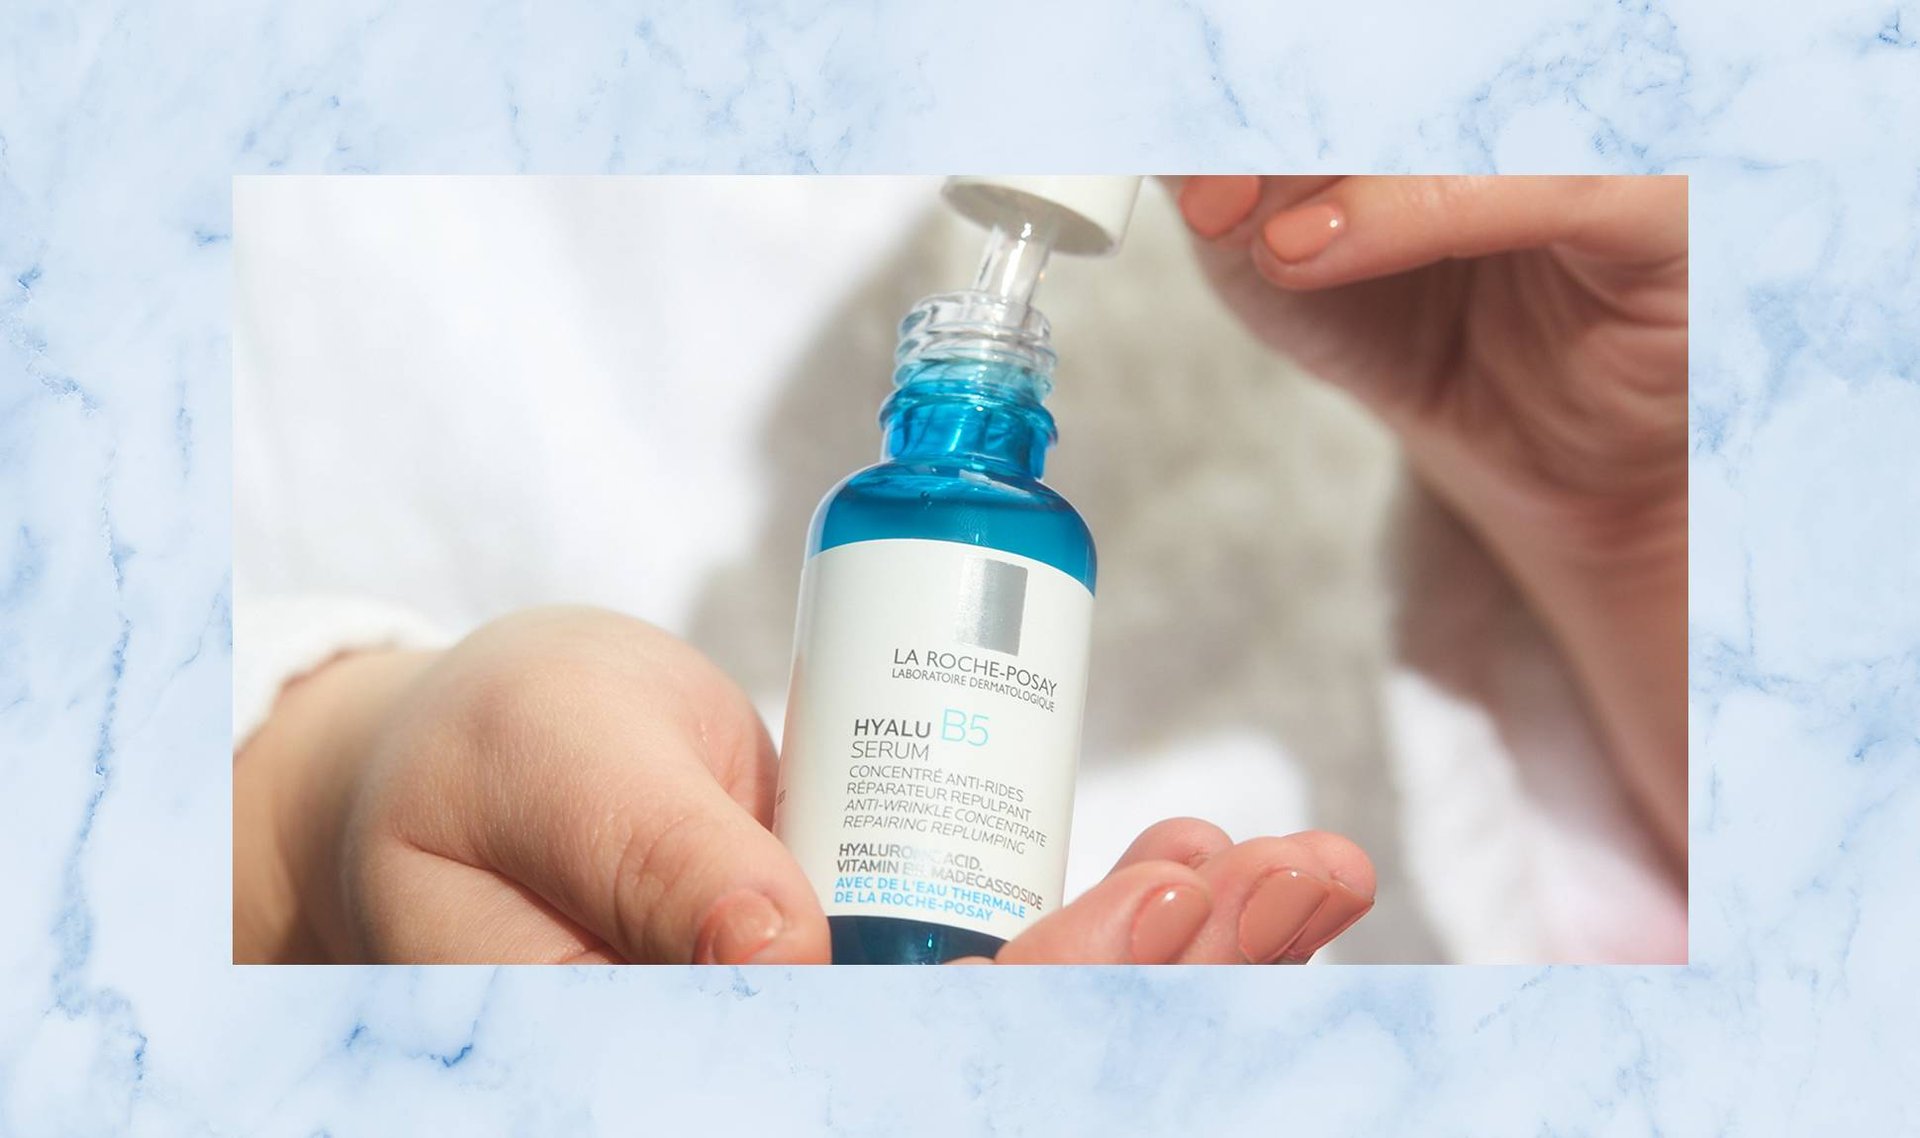 This Hyaluronic Acid Serum Will Plump Your Skin Like No Other